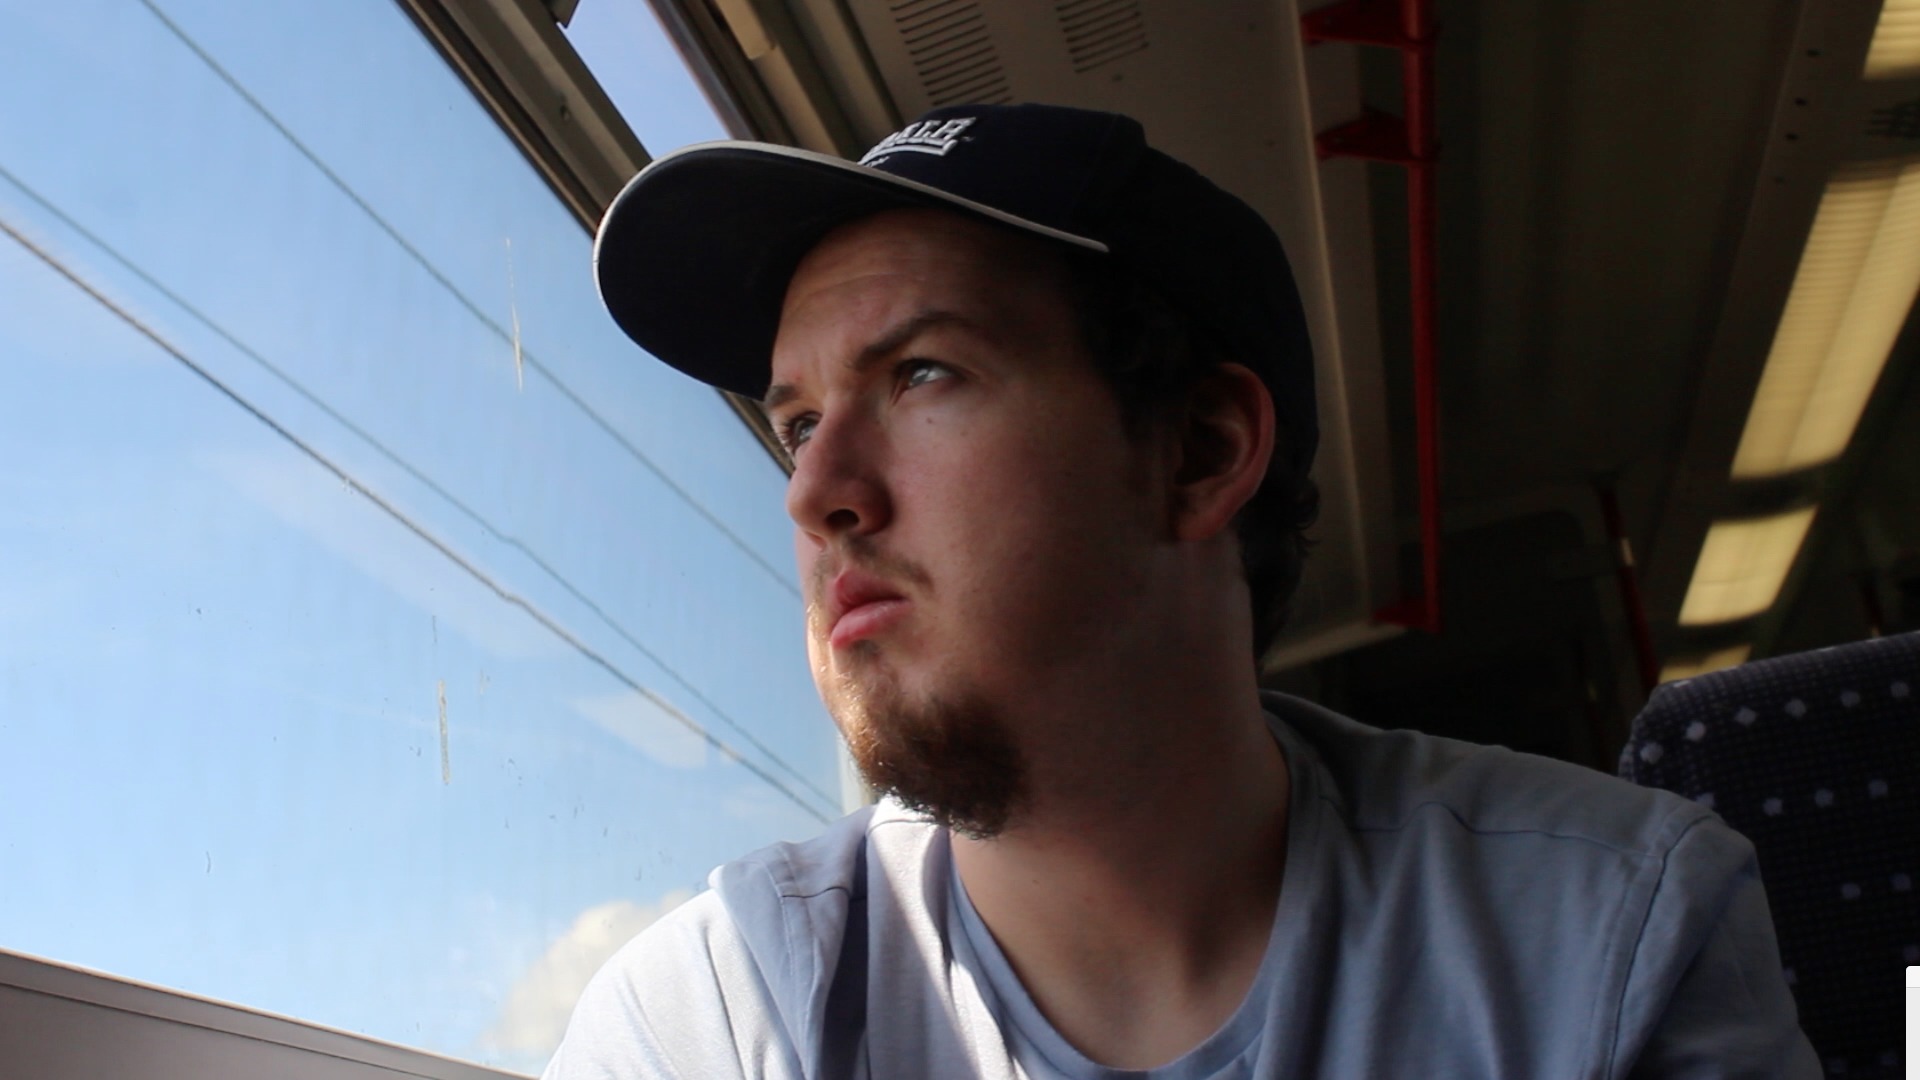 Pensive out of train window.